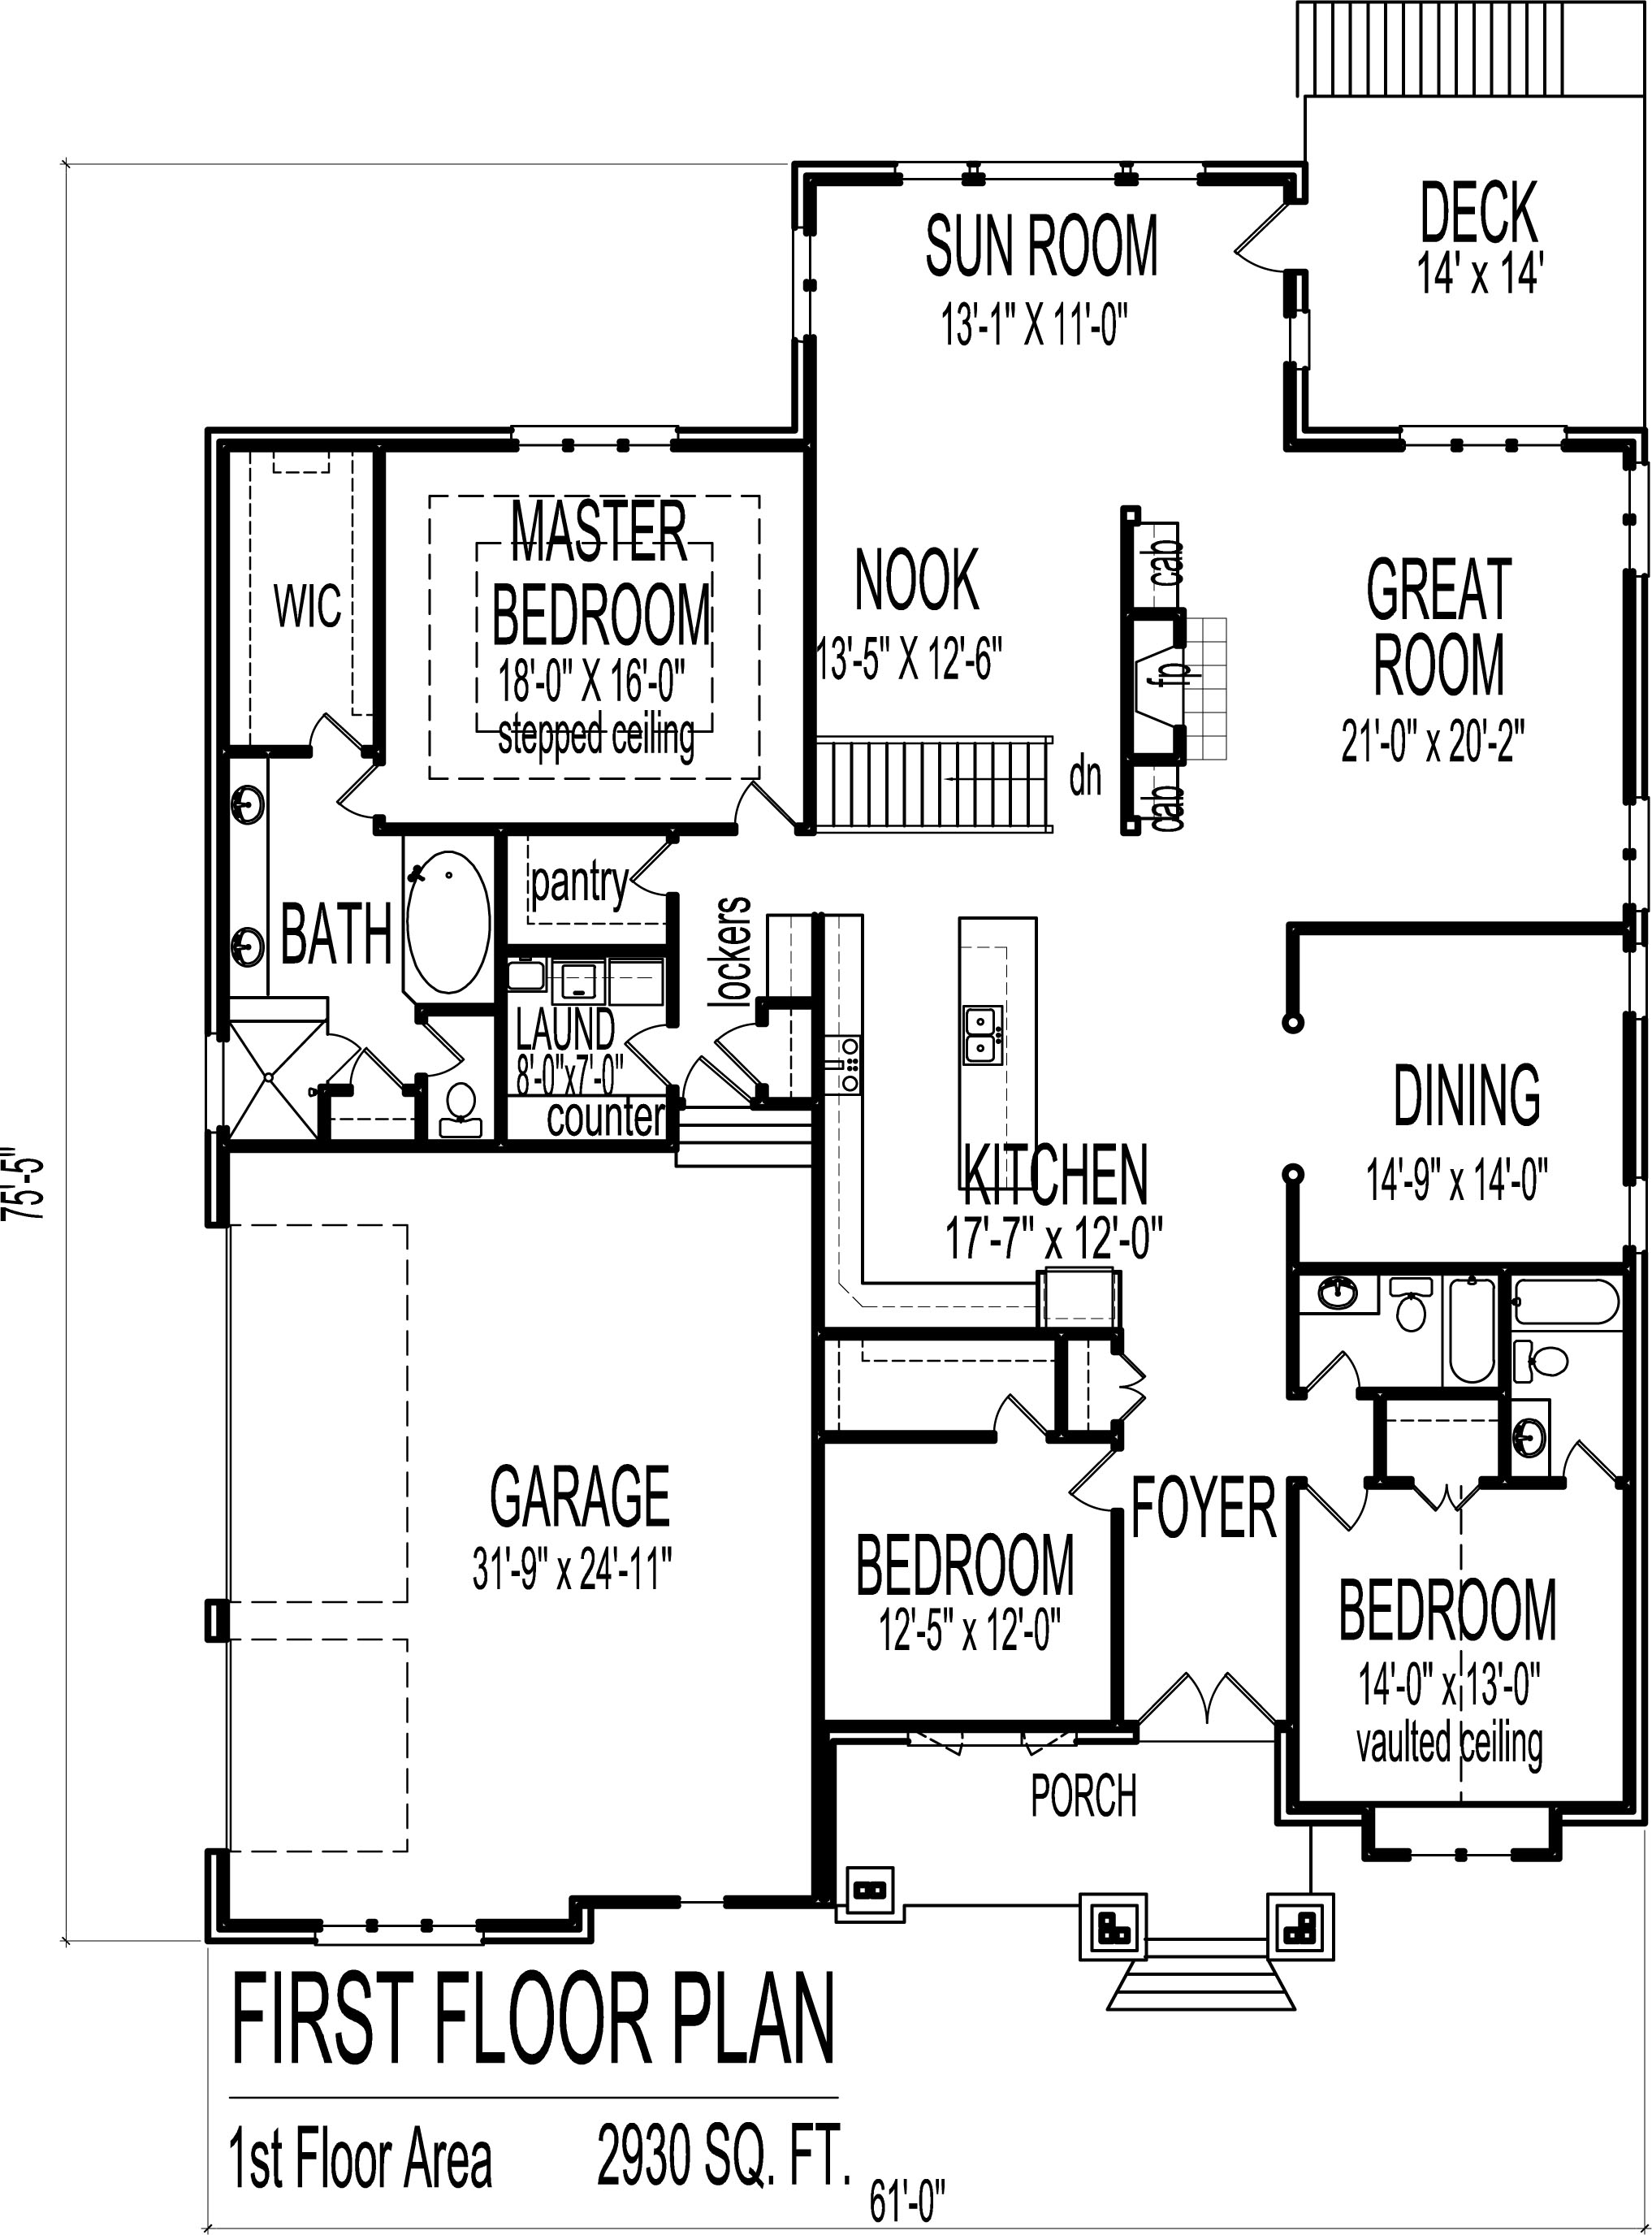 Plan Elevation Section Drawing at GetDrawings Free download